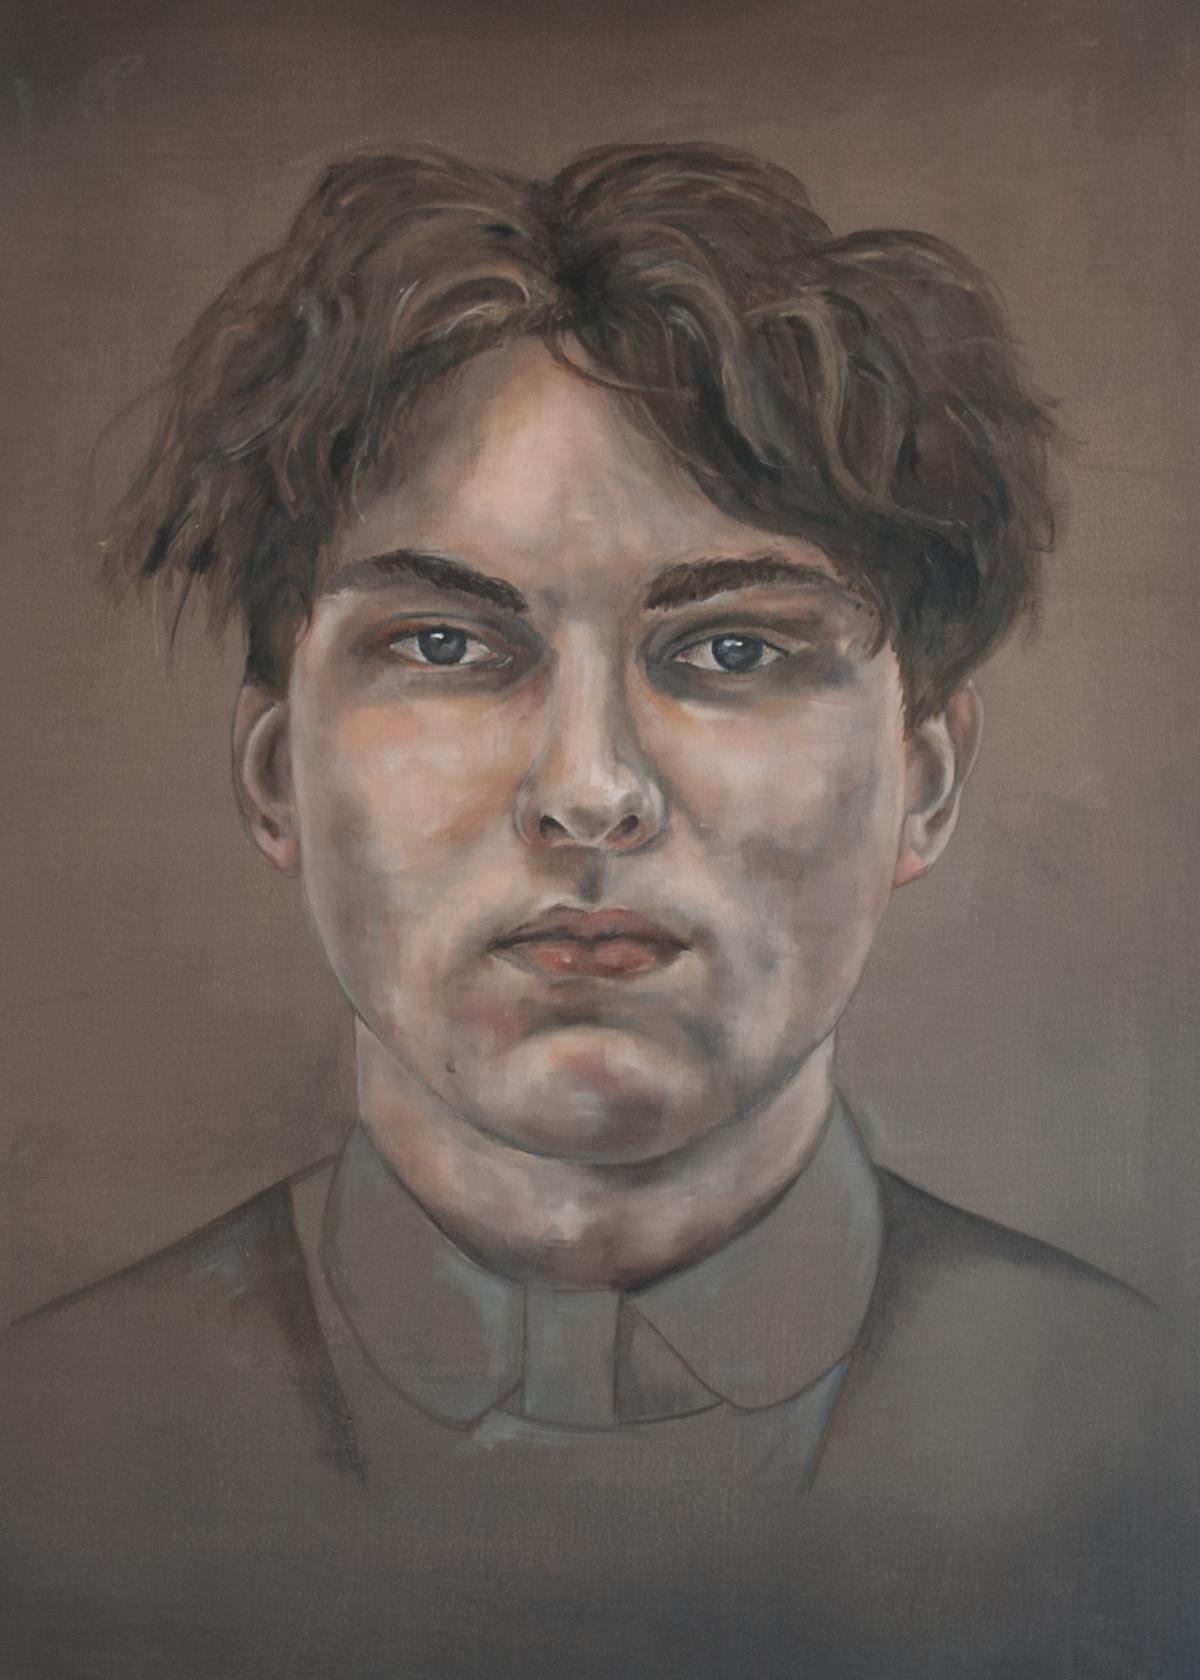 First place painting by Will George Gardner, Eton College